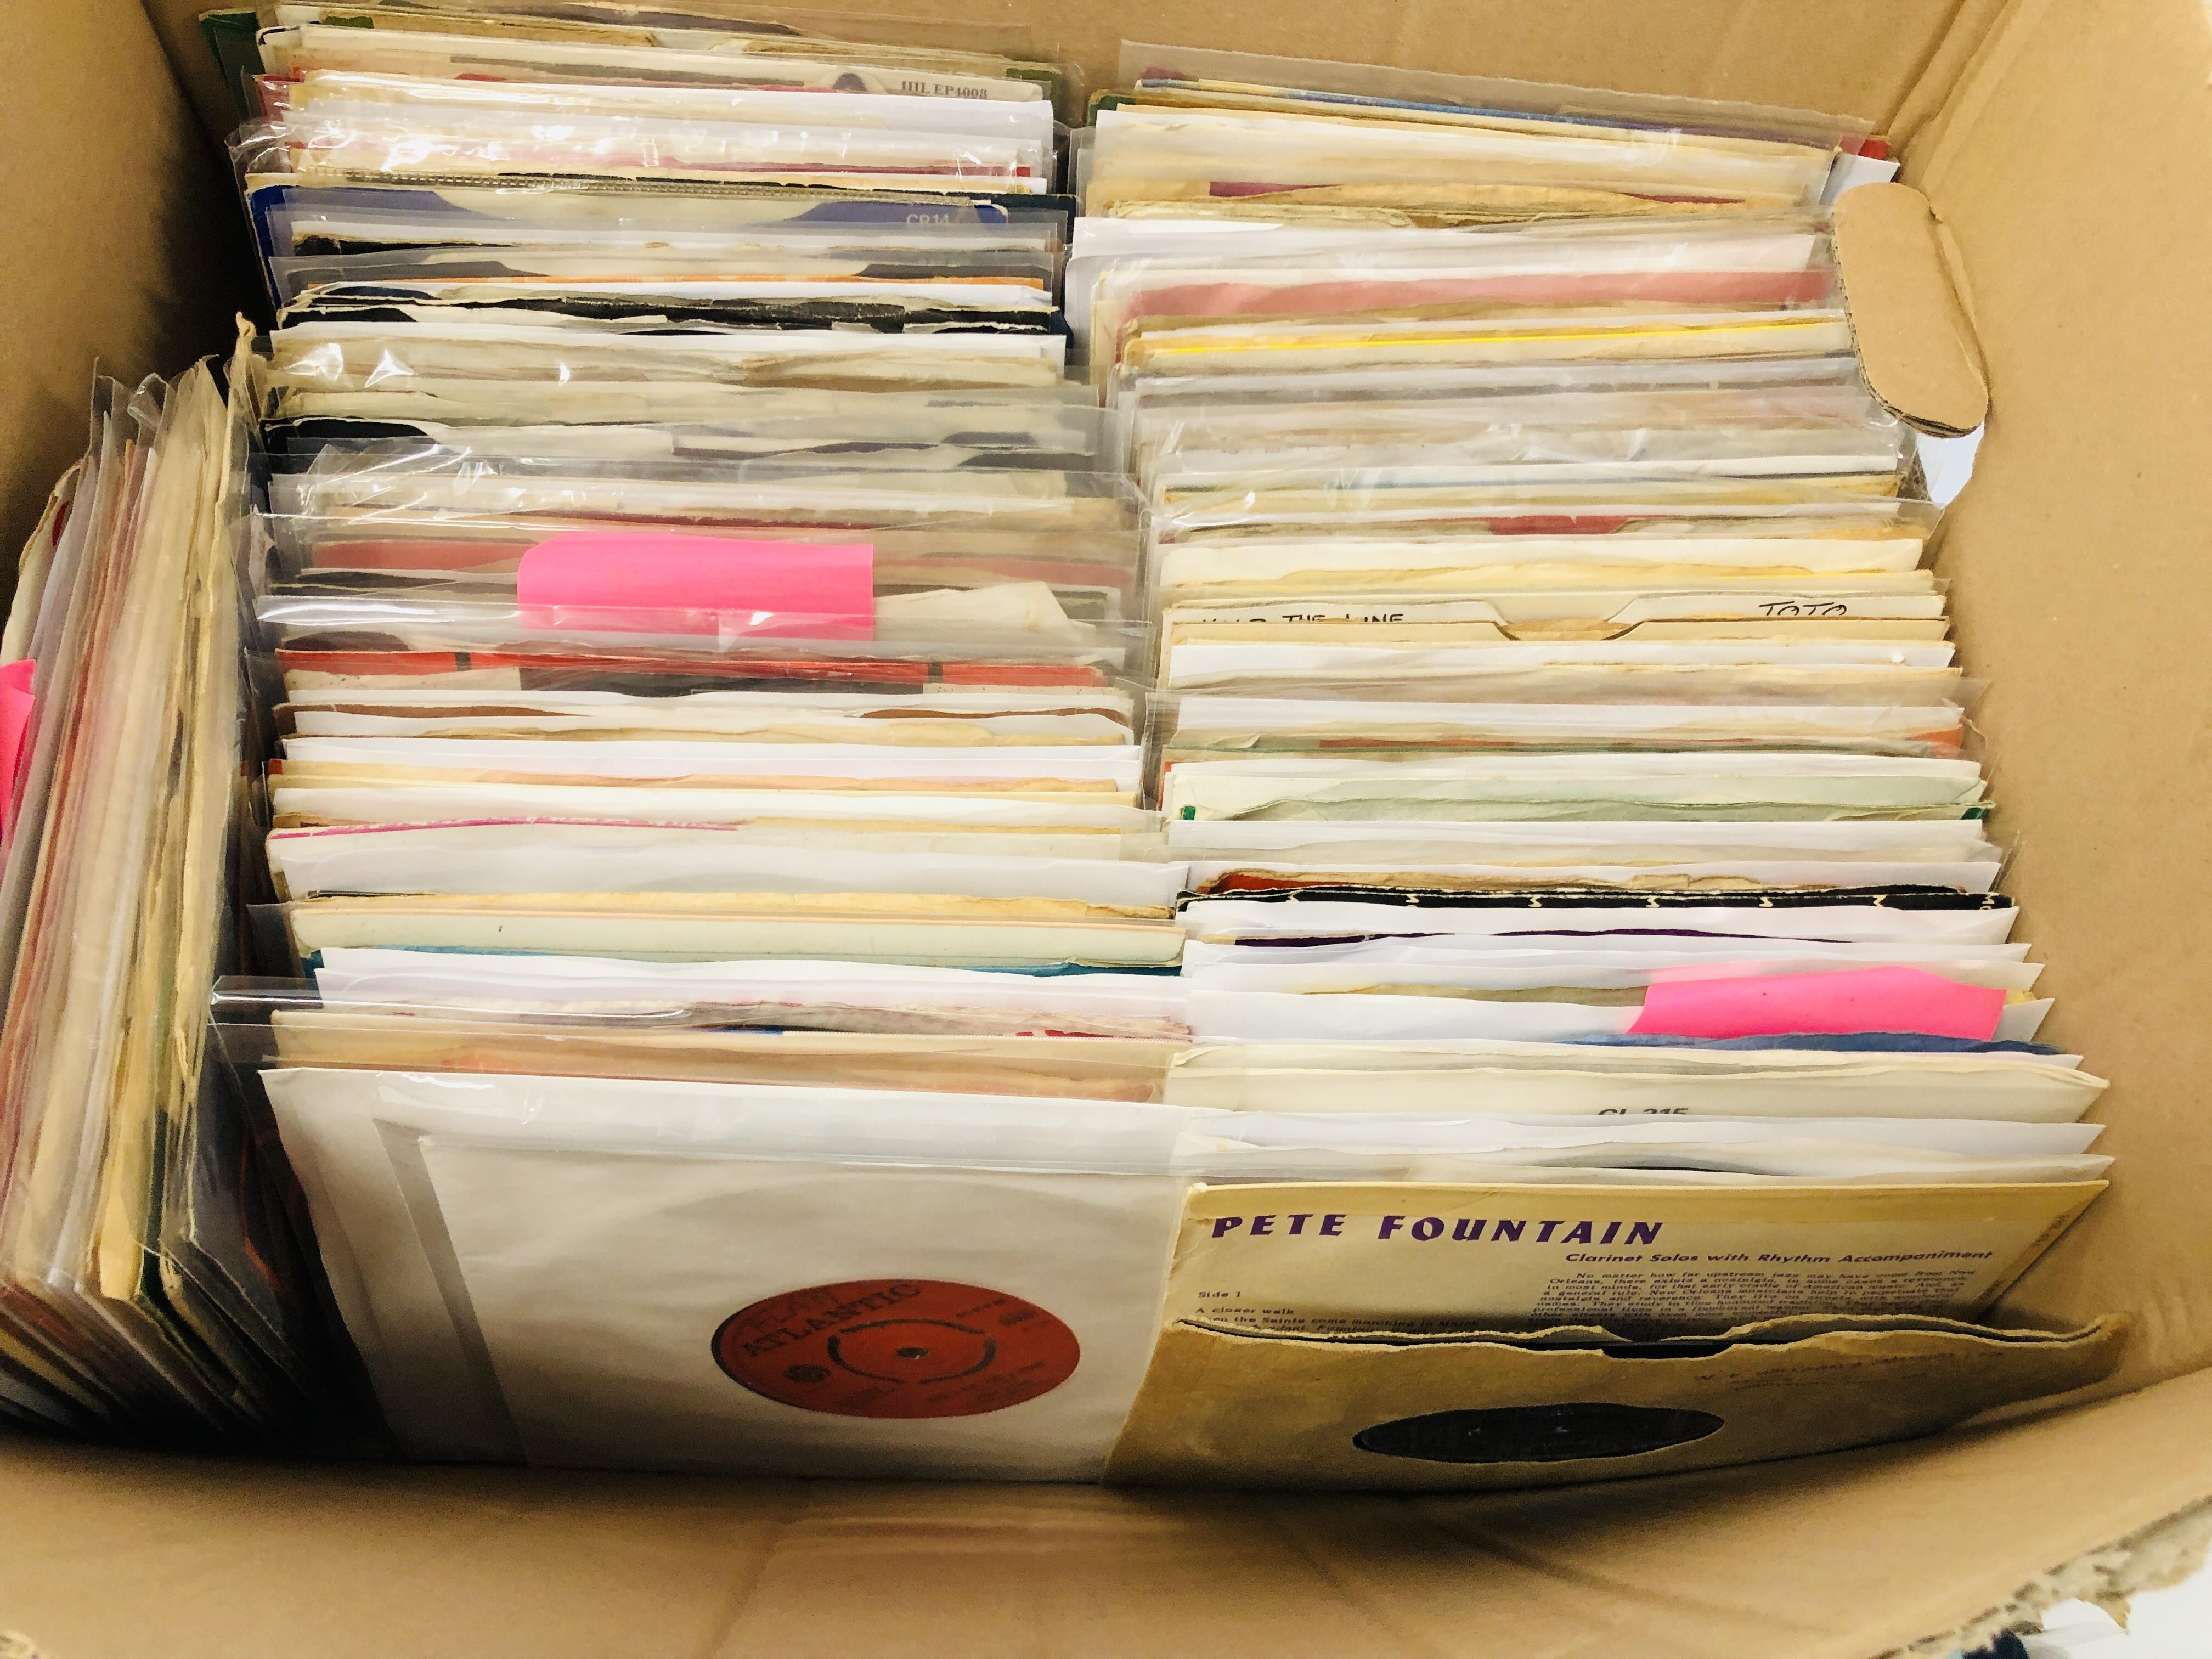 2 BOXES CONTAINING A QUANTITY OF 45 RPM SINGLES TO INCLUDE INXS, CATHERINE WHEEL, PHIL COLLINS, - Image 6 of 10